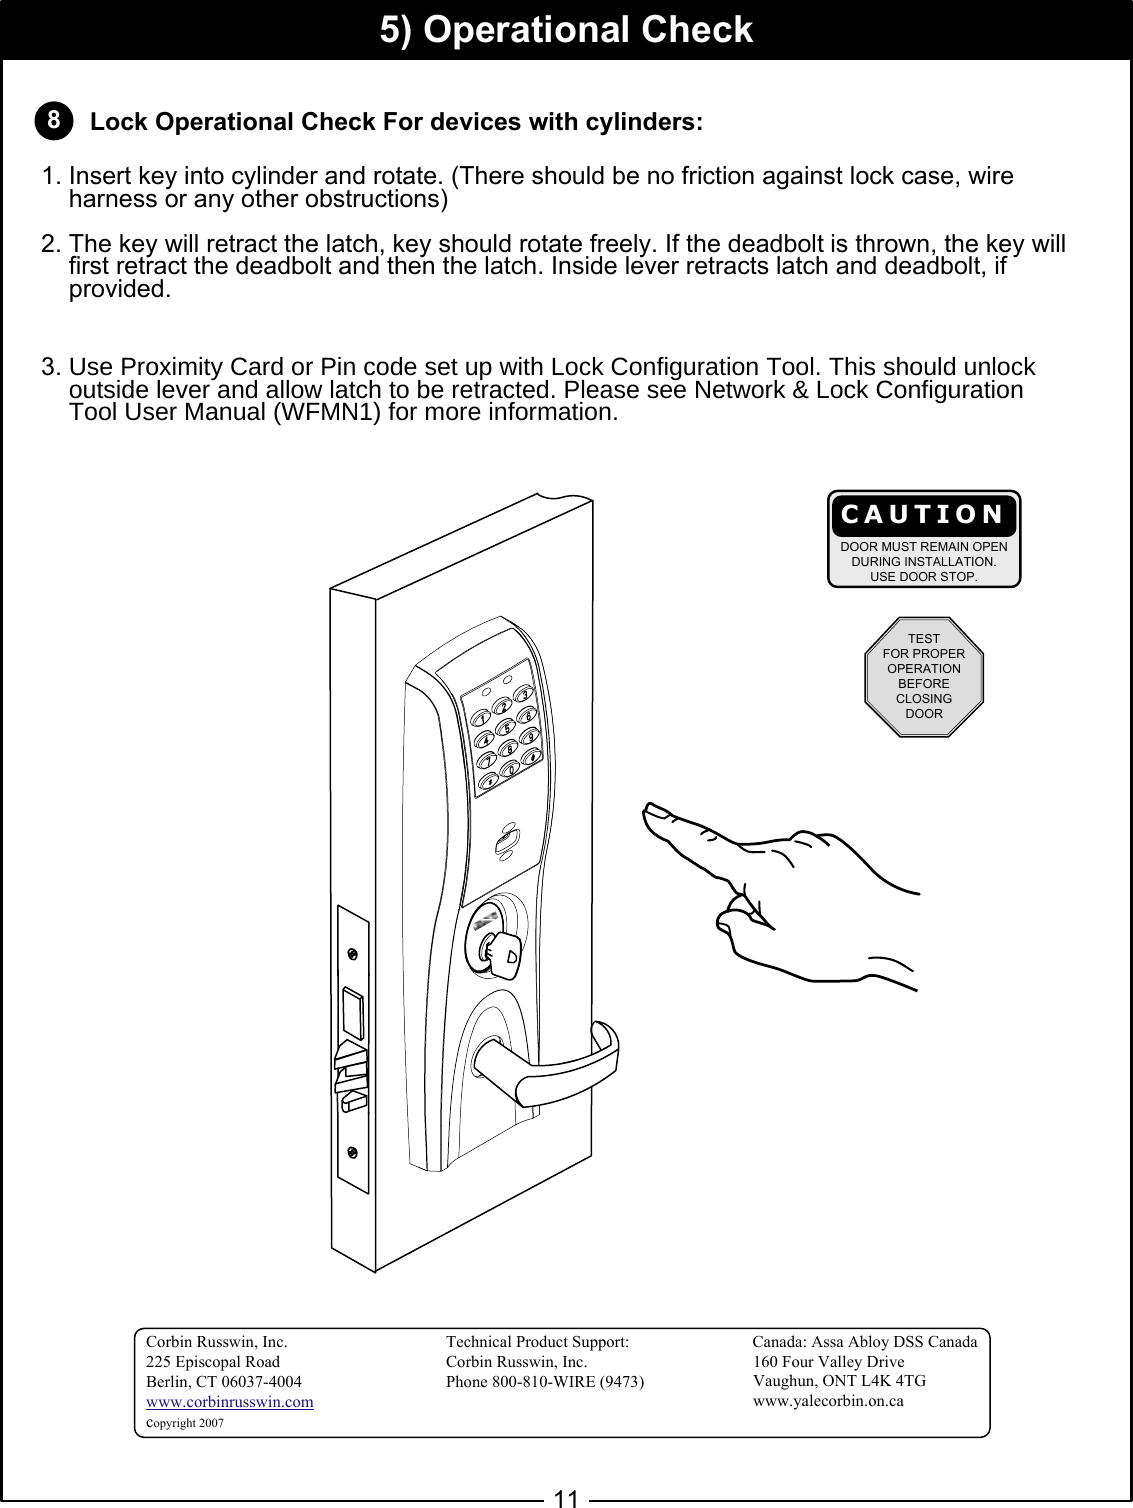 5) Operational Check 811       Lock Operational Check For devices with cylinders:   1. Insert key into cylinder and rotate. (There should be no friction against lock case, wire       harness or any other obstructions)2. The key will retract the latch, key should rotate freely. If the deadbolt is thrown, the key will     first retract the deadbolt and then the latch. Inside lever retracts latch and deadbolt, if       provided.3.8VH3UR[LPLW\&amp;DUGRU3LQFRGHVHWXSZLWK/RFN&amp;RQILJXUDWLRQ7RRO7KLVVKRXOGXQORFNRXWVLGHOHYHUDQGDOORZODWFKWREHUHWUDFWHG3OHDVHVHH1HWZRUN/RFN&amp;RQILJXUDWLRQ     7RRO8VHU0DQXDO:)01IRUPRUHLQIRUPDWLRQCAUTIONDOOR MUST REMAIN OPENDURING INSTALLATION.USE DOOR STOP.TESTFOR PROPEROPERATIONBEFORECLOSINGDOORCorbin Russwin, Inc.                 Technical Product Support:         225 Episcopal Road                 Corbin Russwin, Inc.Berlin, CT 06037-4004                 Phone 800-810-WIRE (9473)        www.corbinrusswin.comcopyright 2007Canada: Assa Abloy DSS Canada160 Four Valley DriveVaughun, ONT L4K 4TGwww.yalecorbin.on.ca